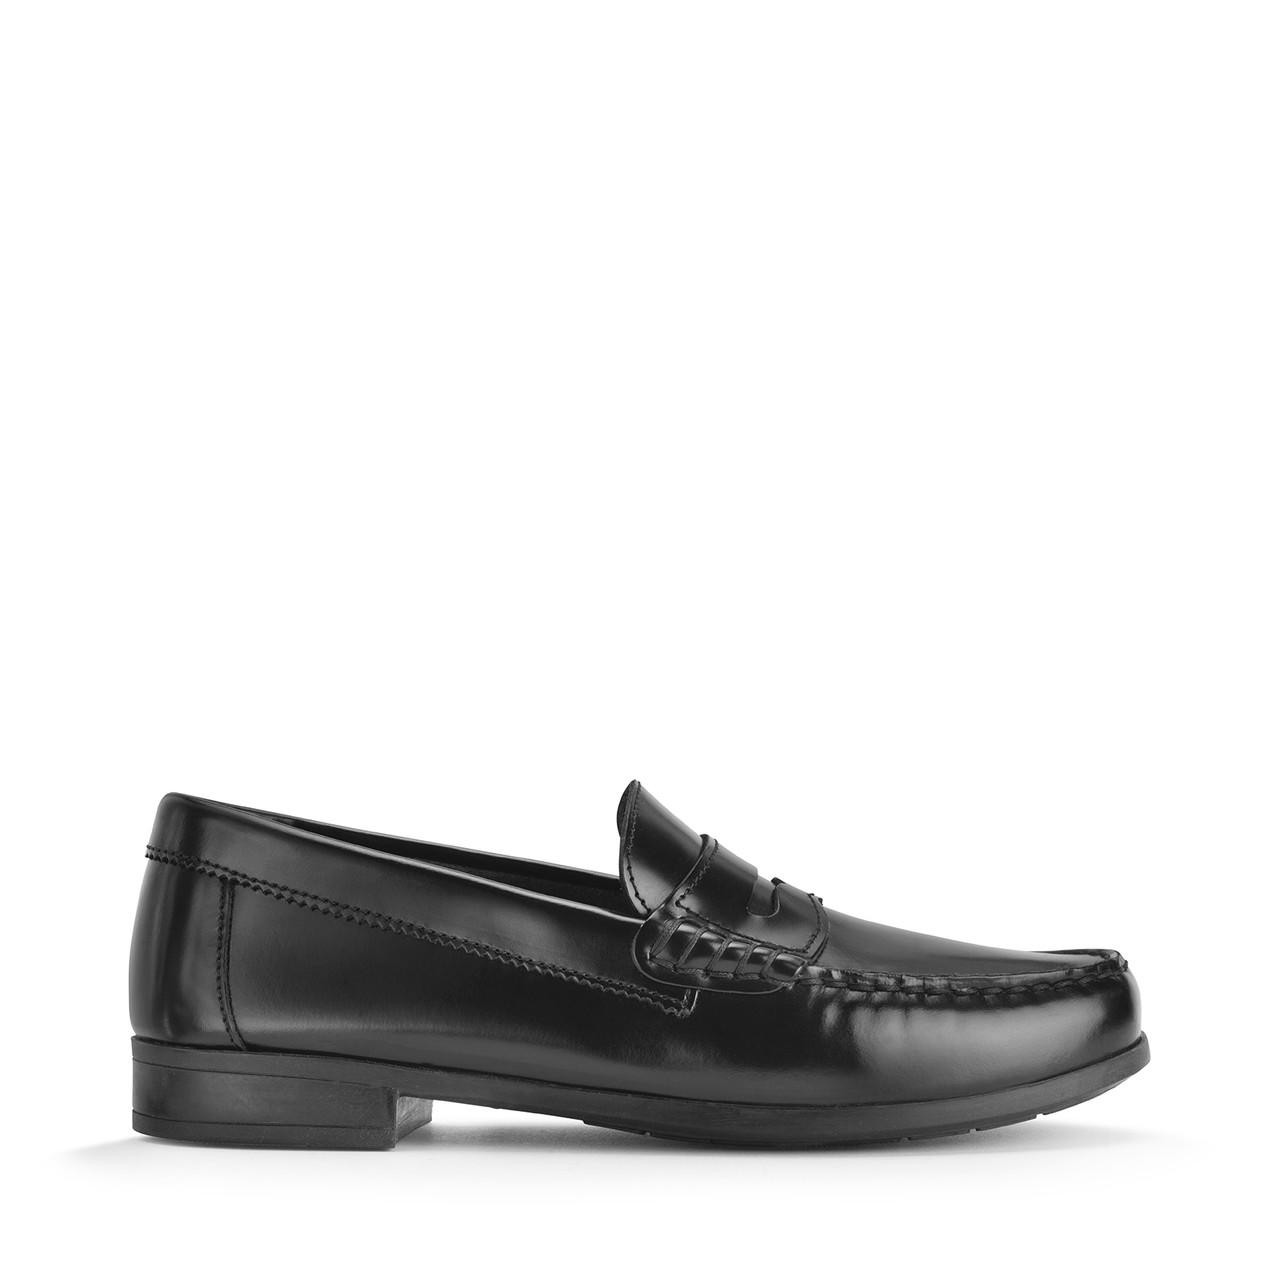 Penny 2, Black high shine leather slip-on school shoes